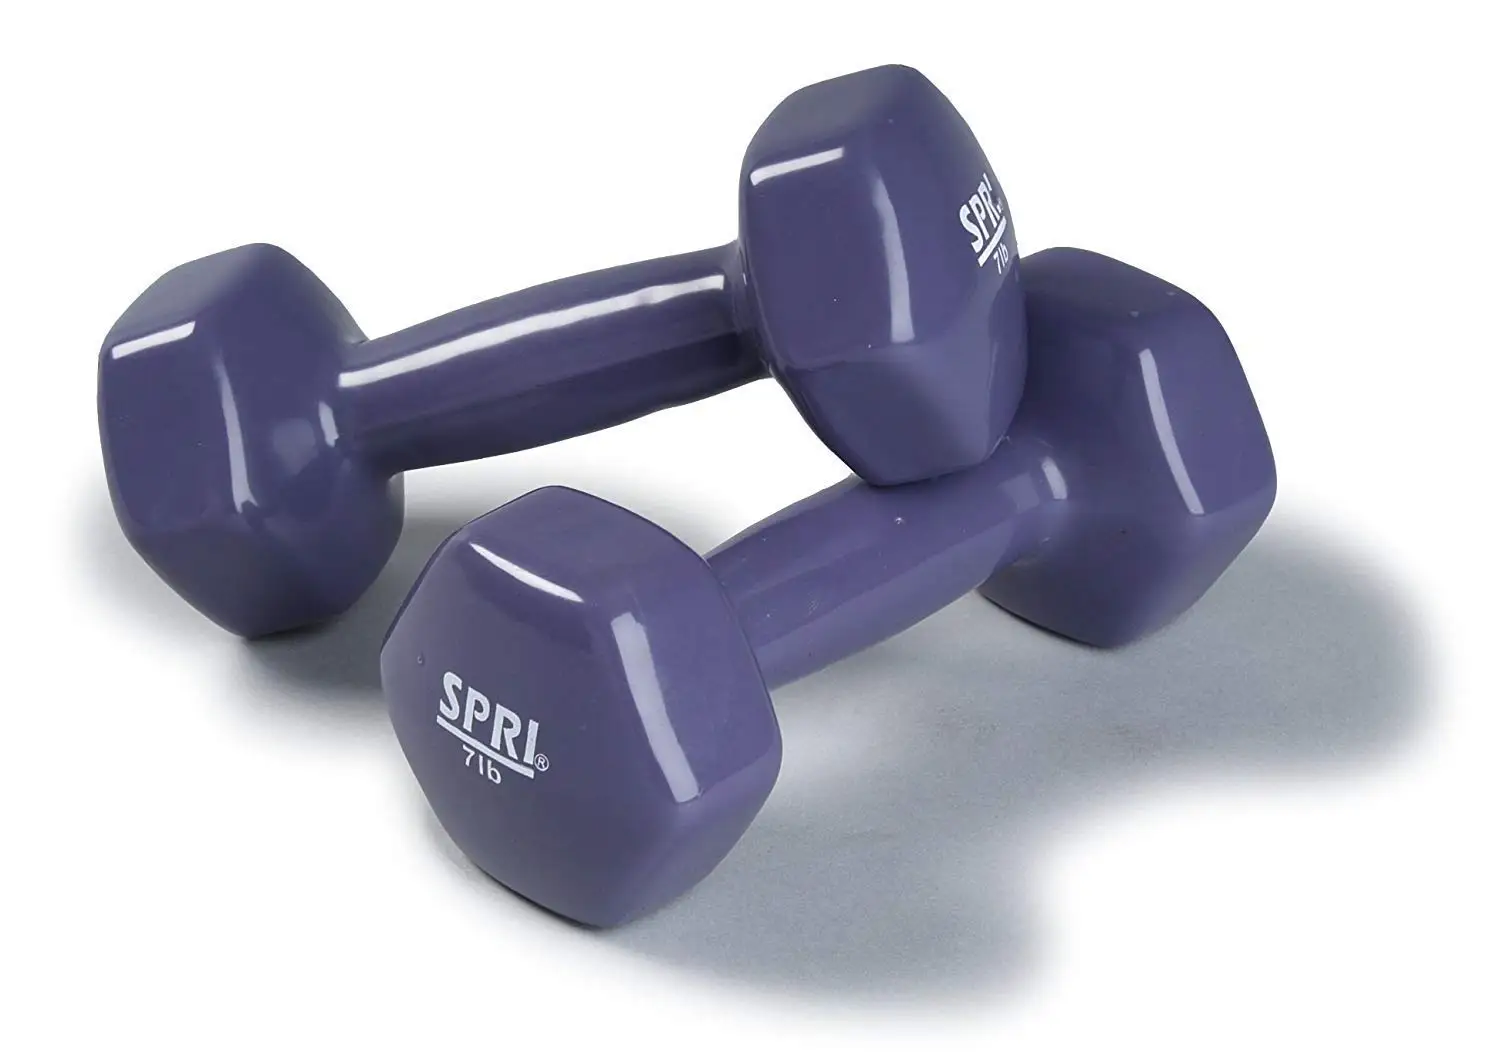 where can i get dumbbells cheap